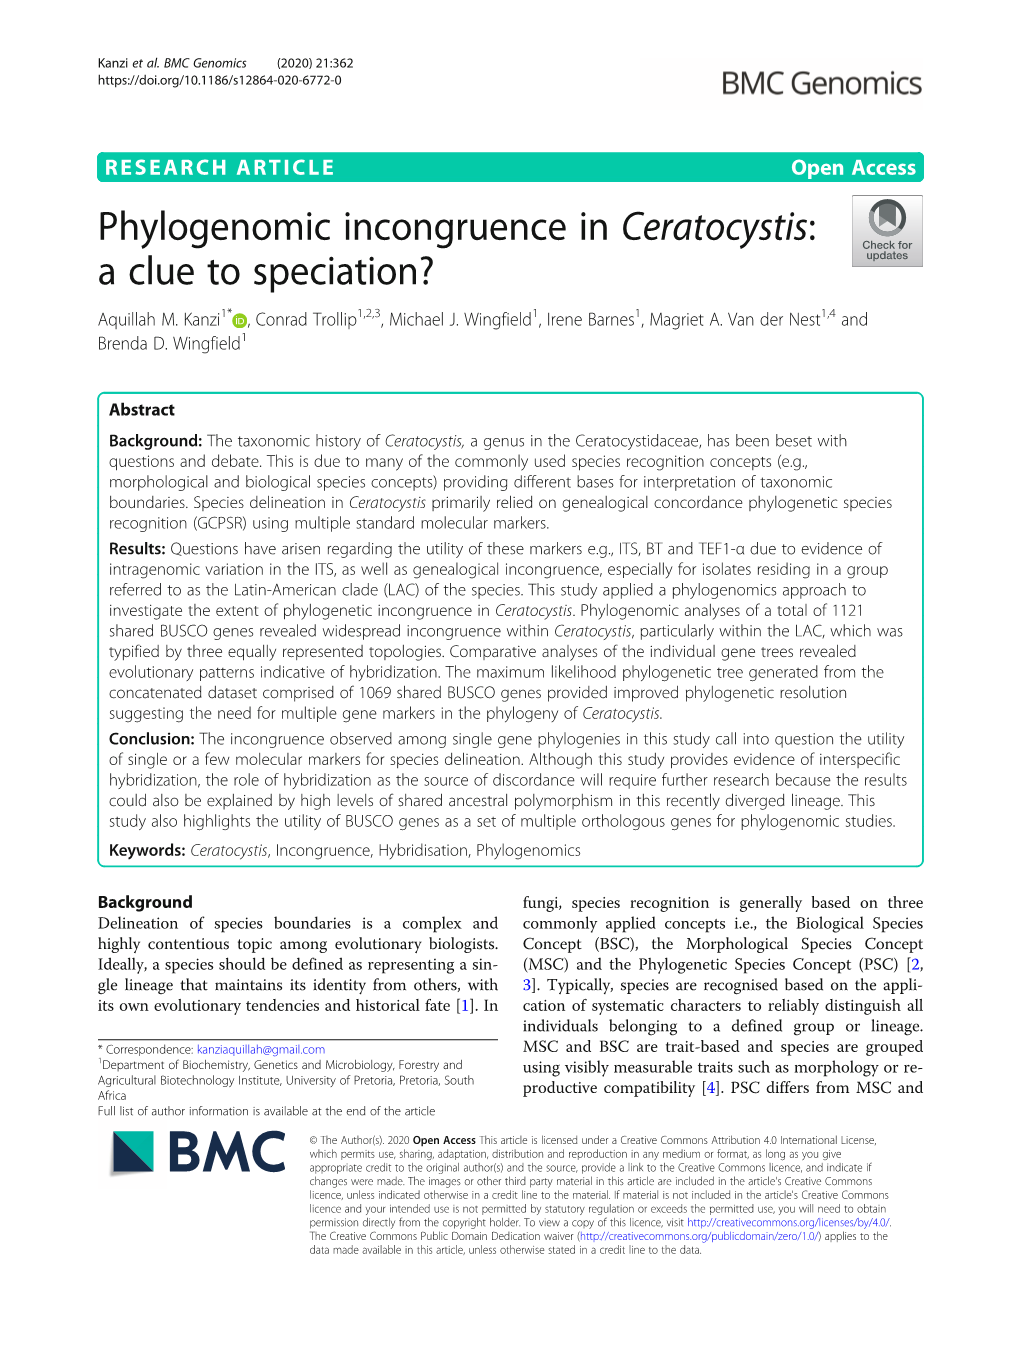 Phylogenomic Incongruence in Ceratocystis: a Clue to Speciation? Aquillah M